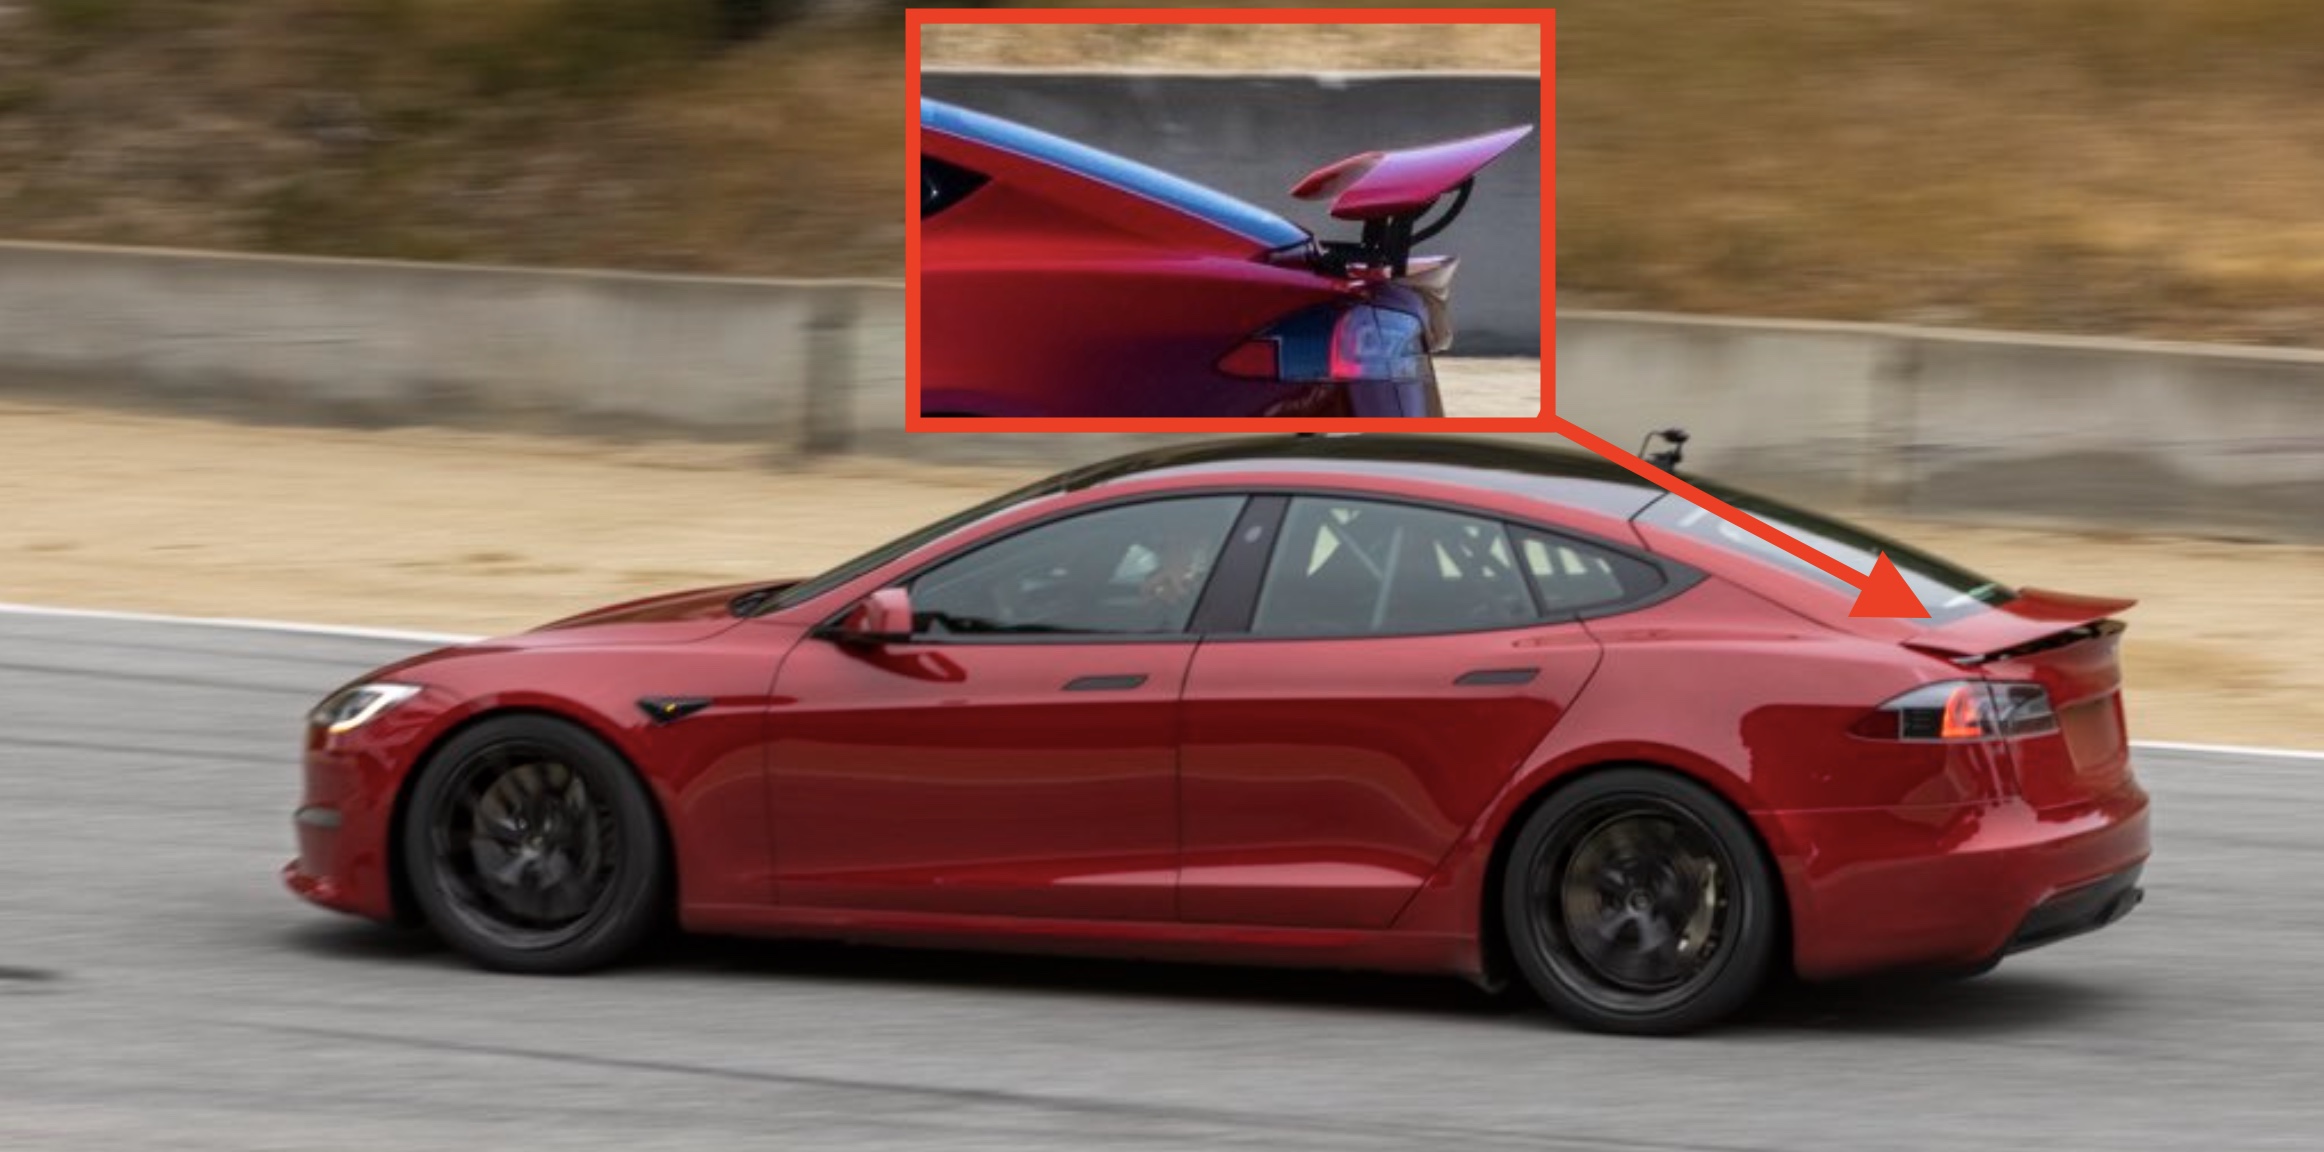 Tesla Model S Plaid prototype with insane retractable spoiler spotted on  race track - Electrek